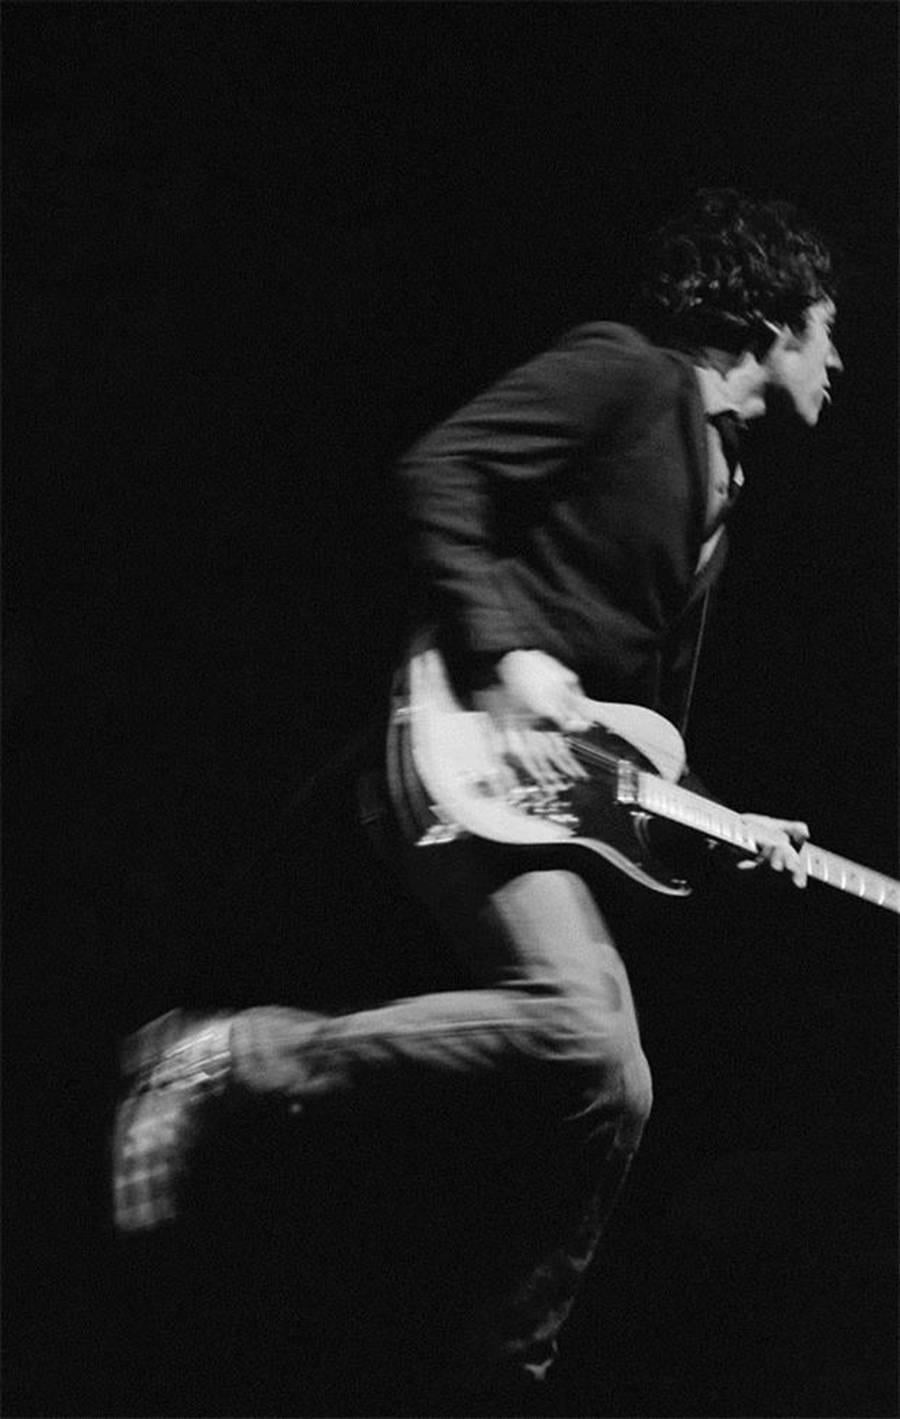 Patrick Harbron Black and White Photograph - Bruce Springsteen, 1978